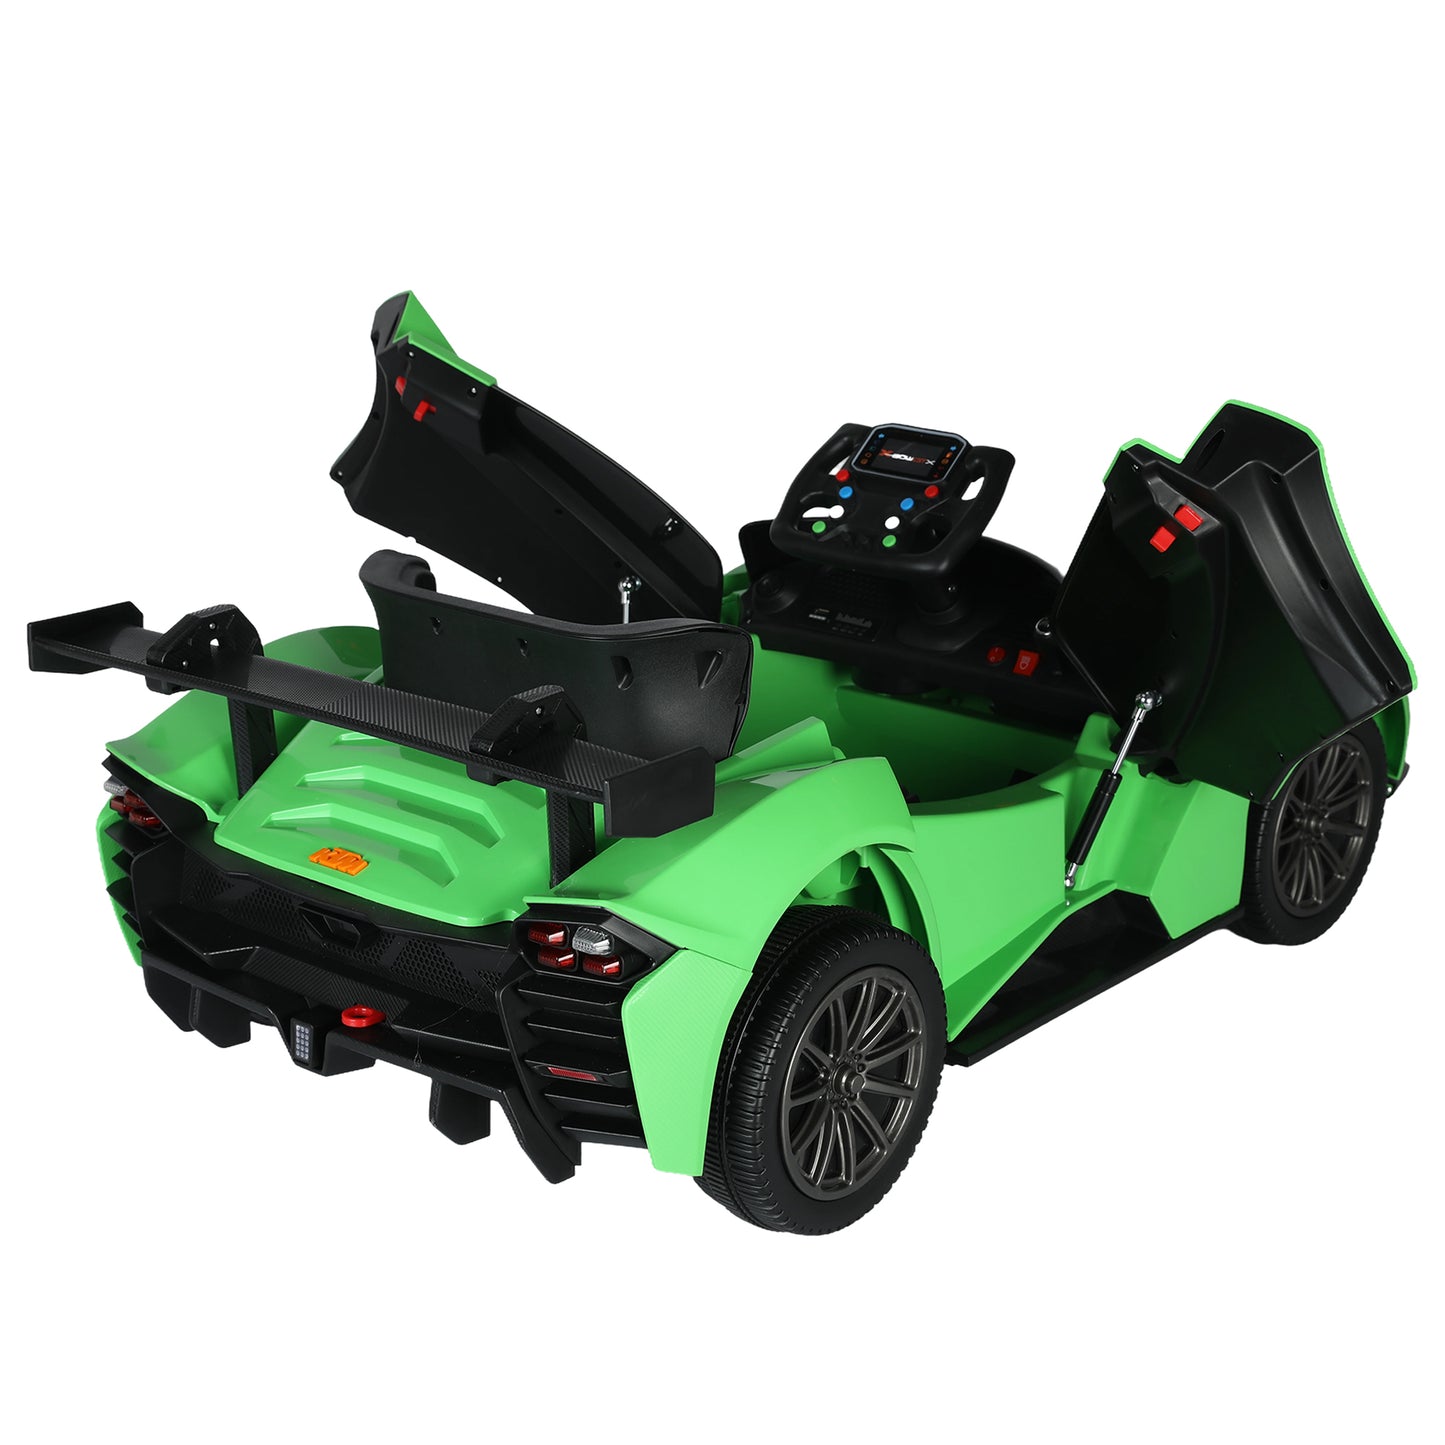 Licensed ktm x bow gtx,12v7A Kids ride on car 2.4G W/Parents Remote Control,electric car for kids,Three speed adjustable,Power display, USB,MP3 ,Bluetooth,LED light,Two-point safety belt